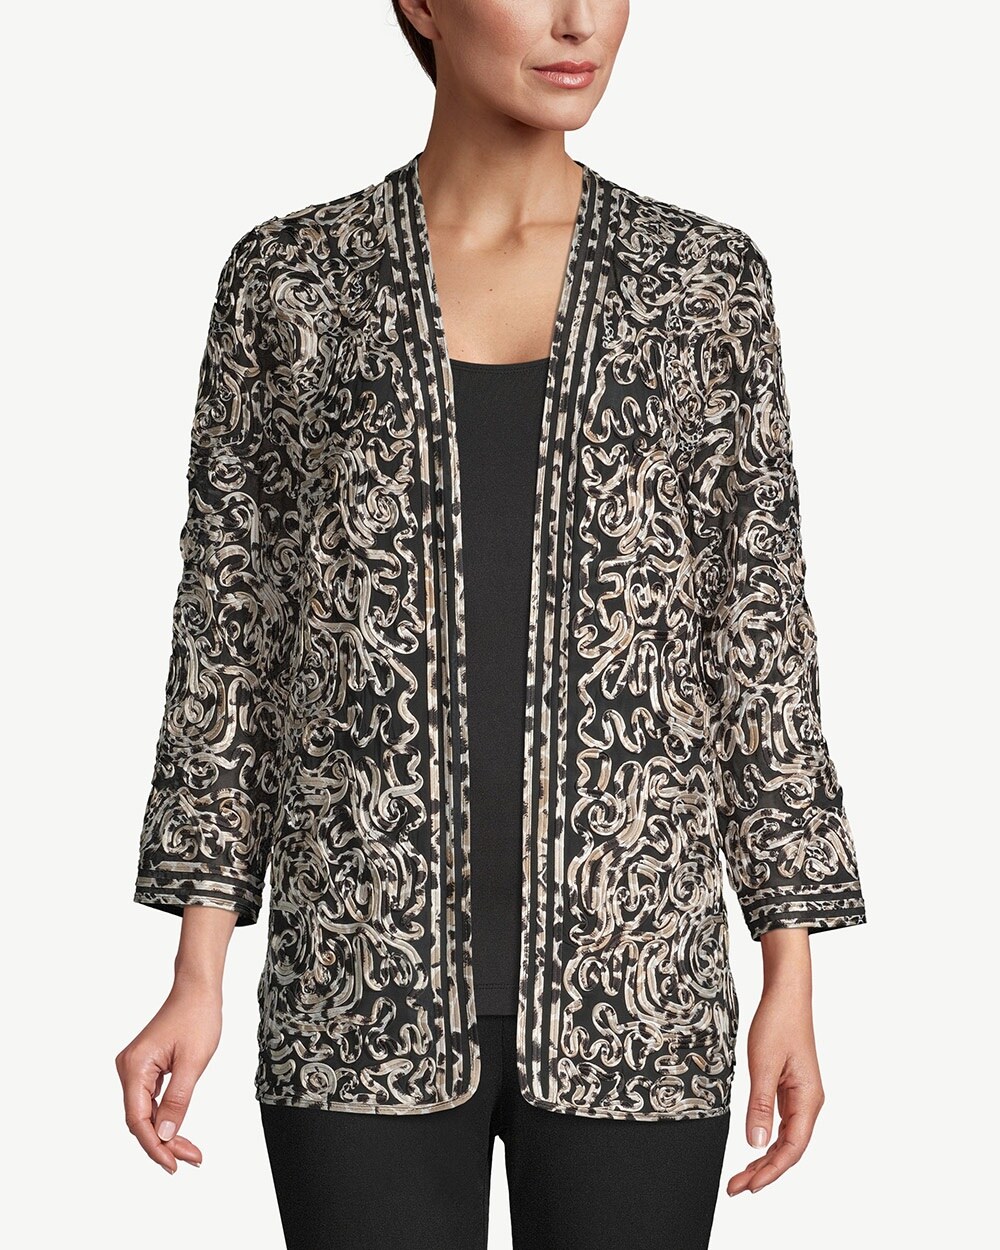 Travelers Collection Printed Soutache Jacket